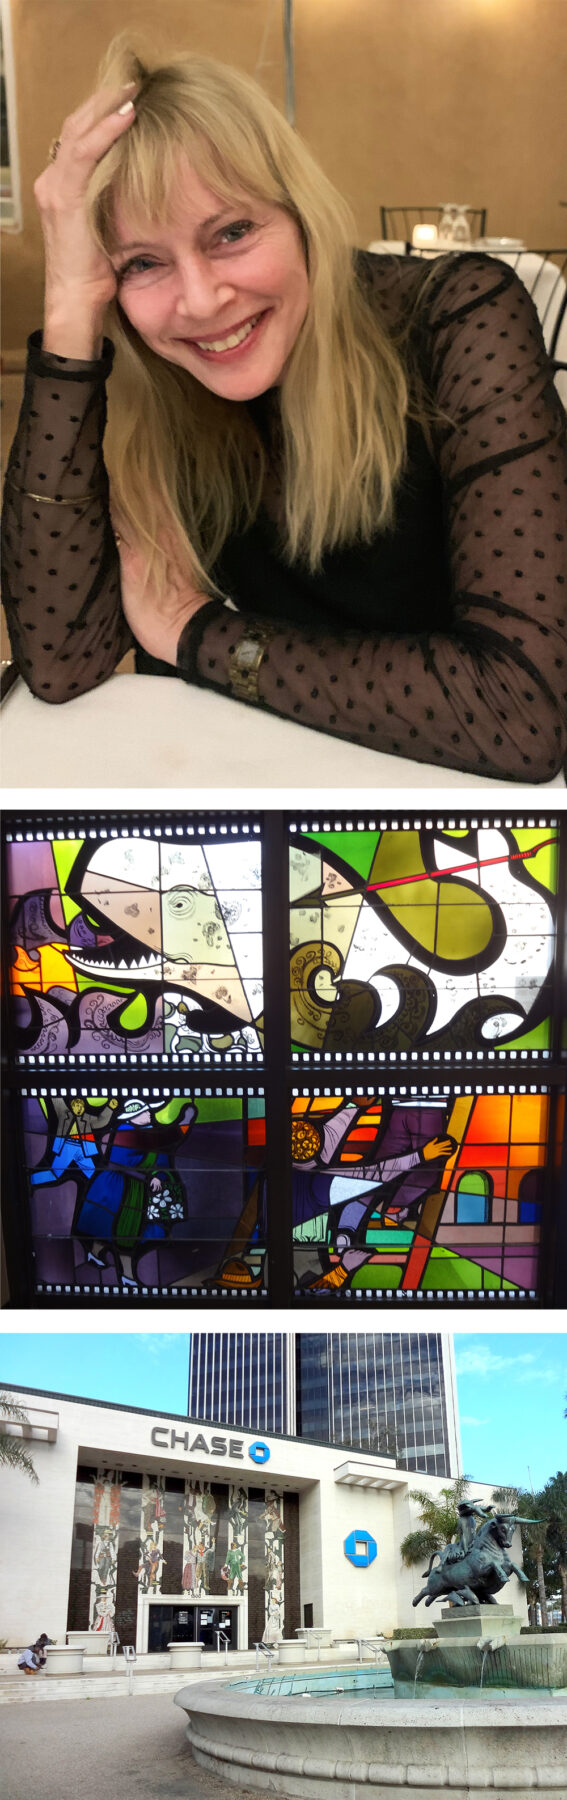 portrait of Victoria Lautman (top), glass mosaic of whale (middle), front of Chase bank (bottom)